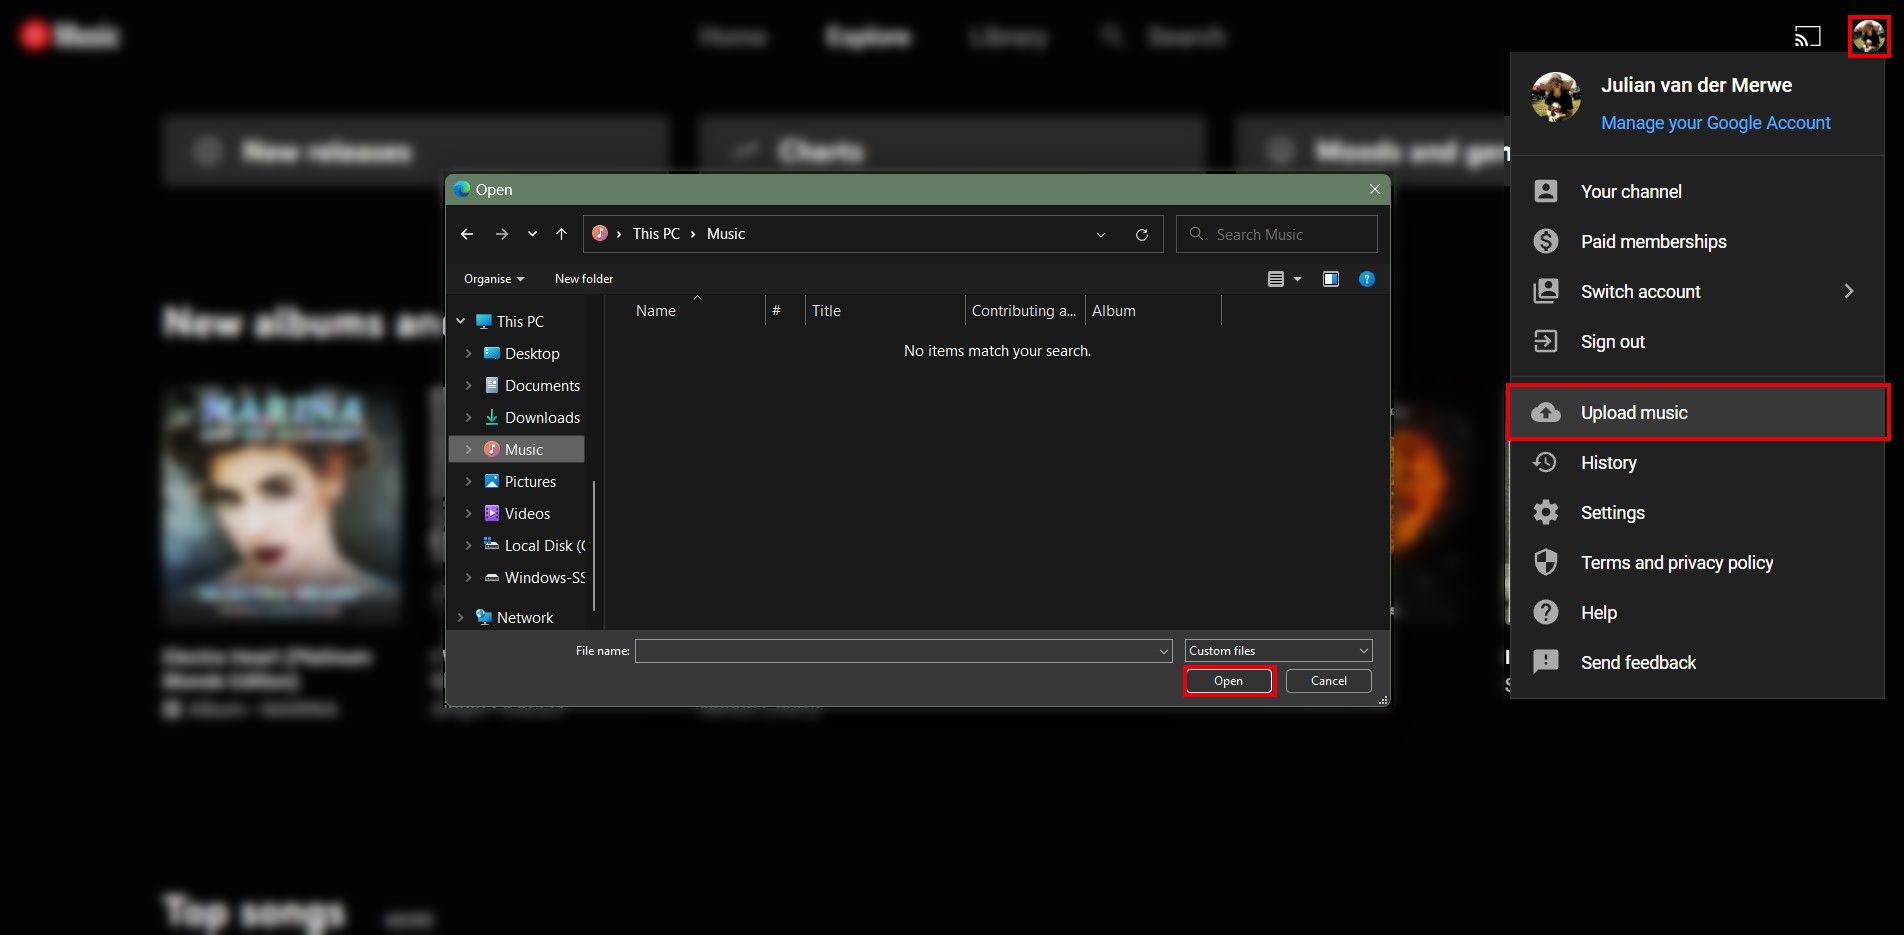 youtube music desktop interface with the file explorer open in order to upload music from your desktop